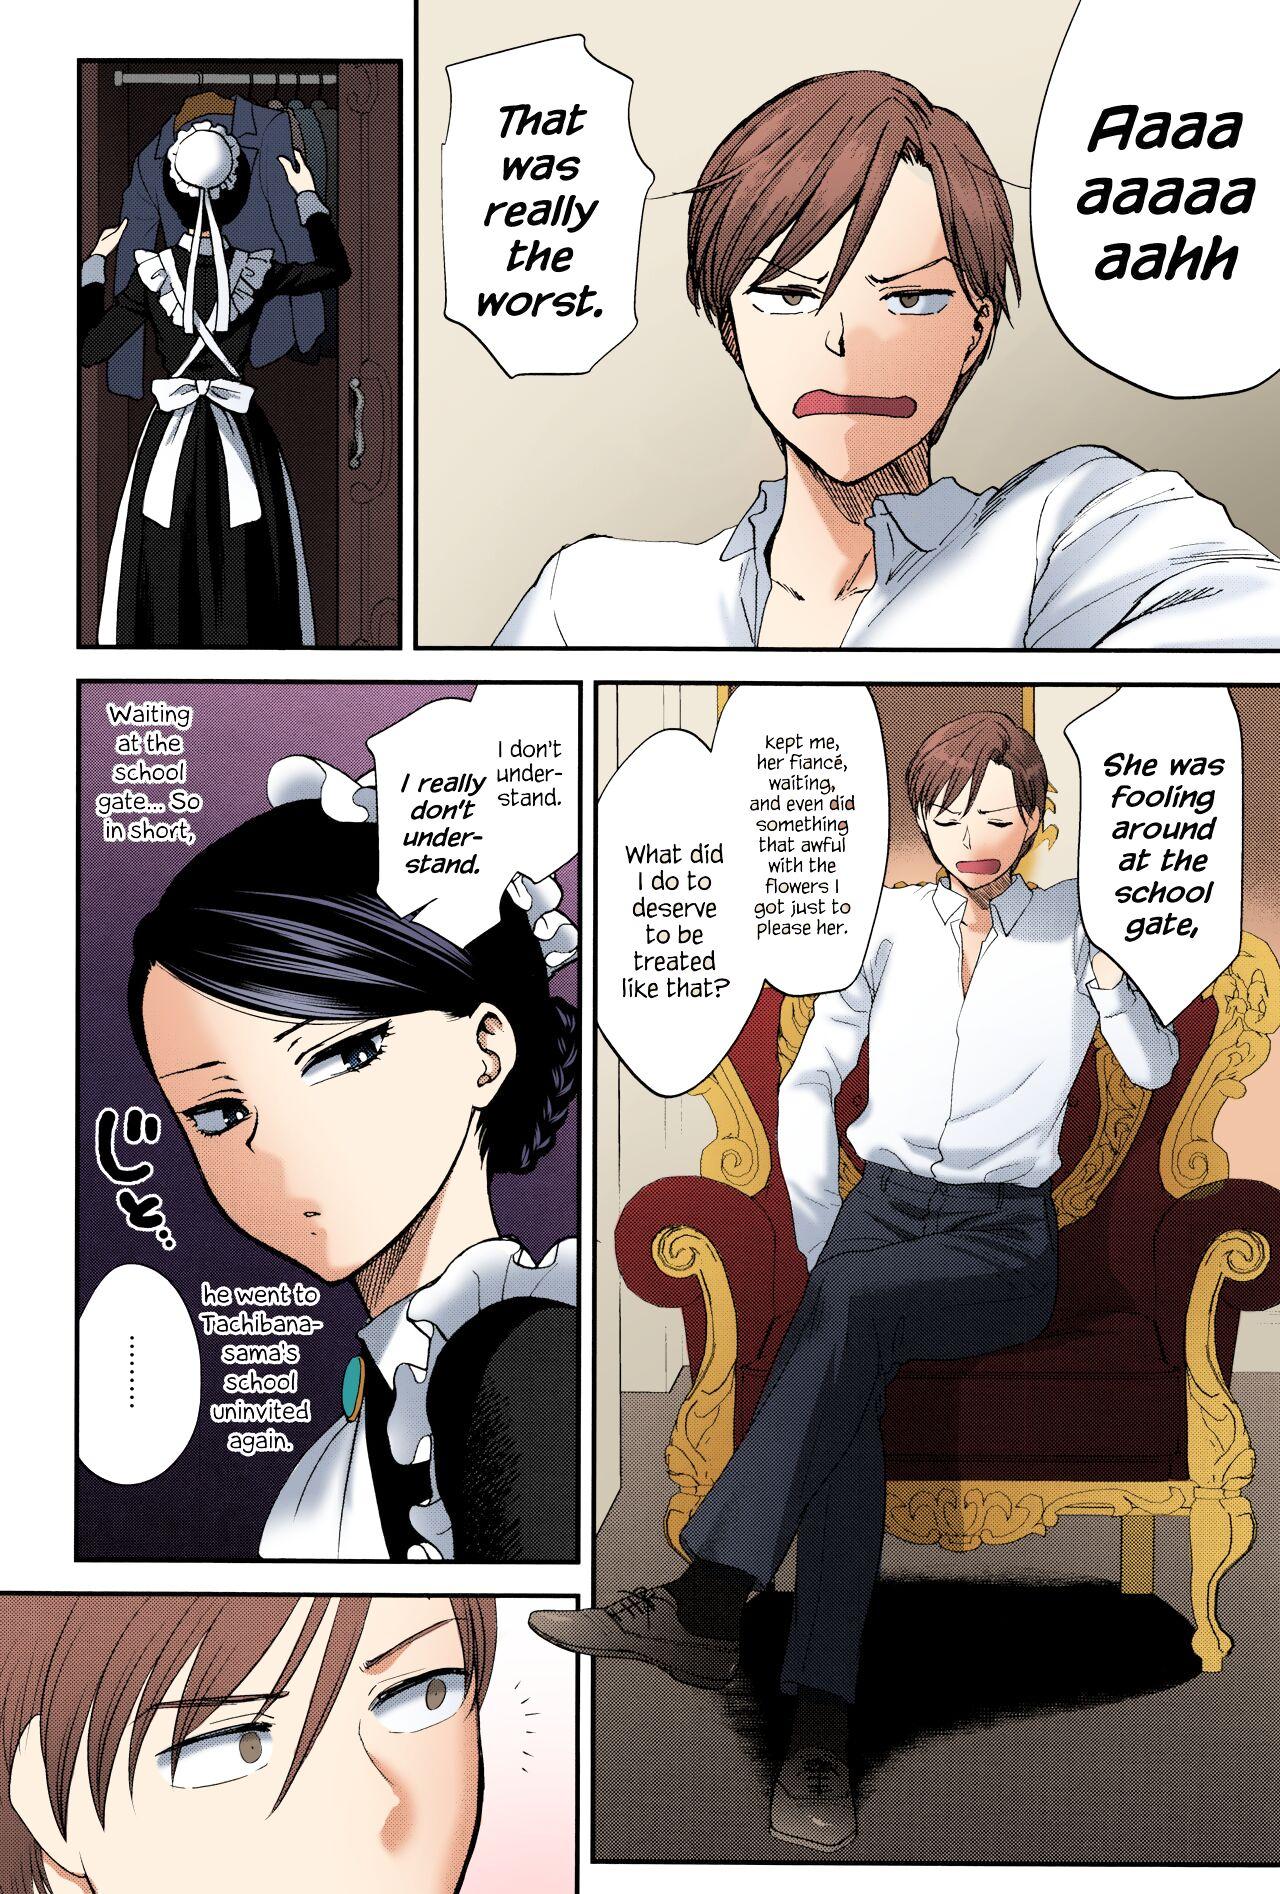 Chudai Kyoudou Well Maid - The Well “Maid” Instructor - Original Thuylinh - Page 2